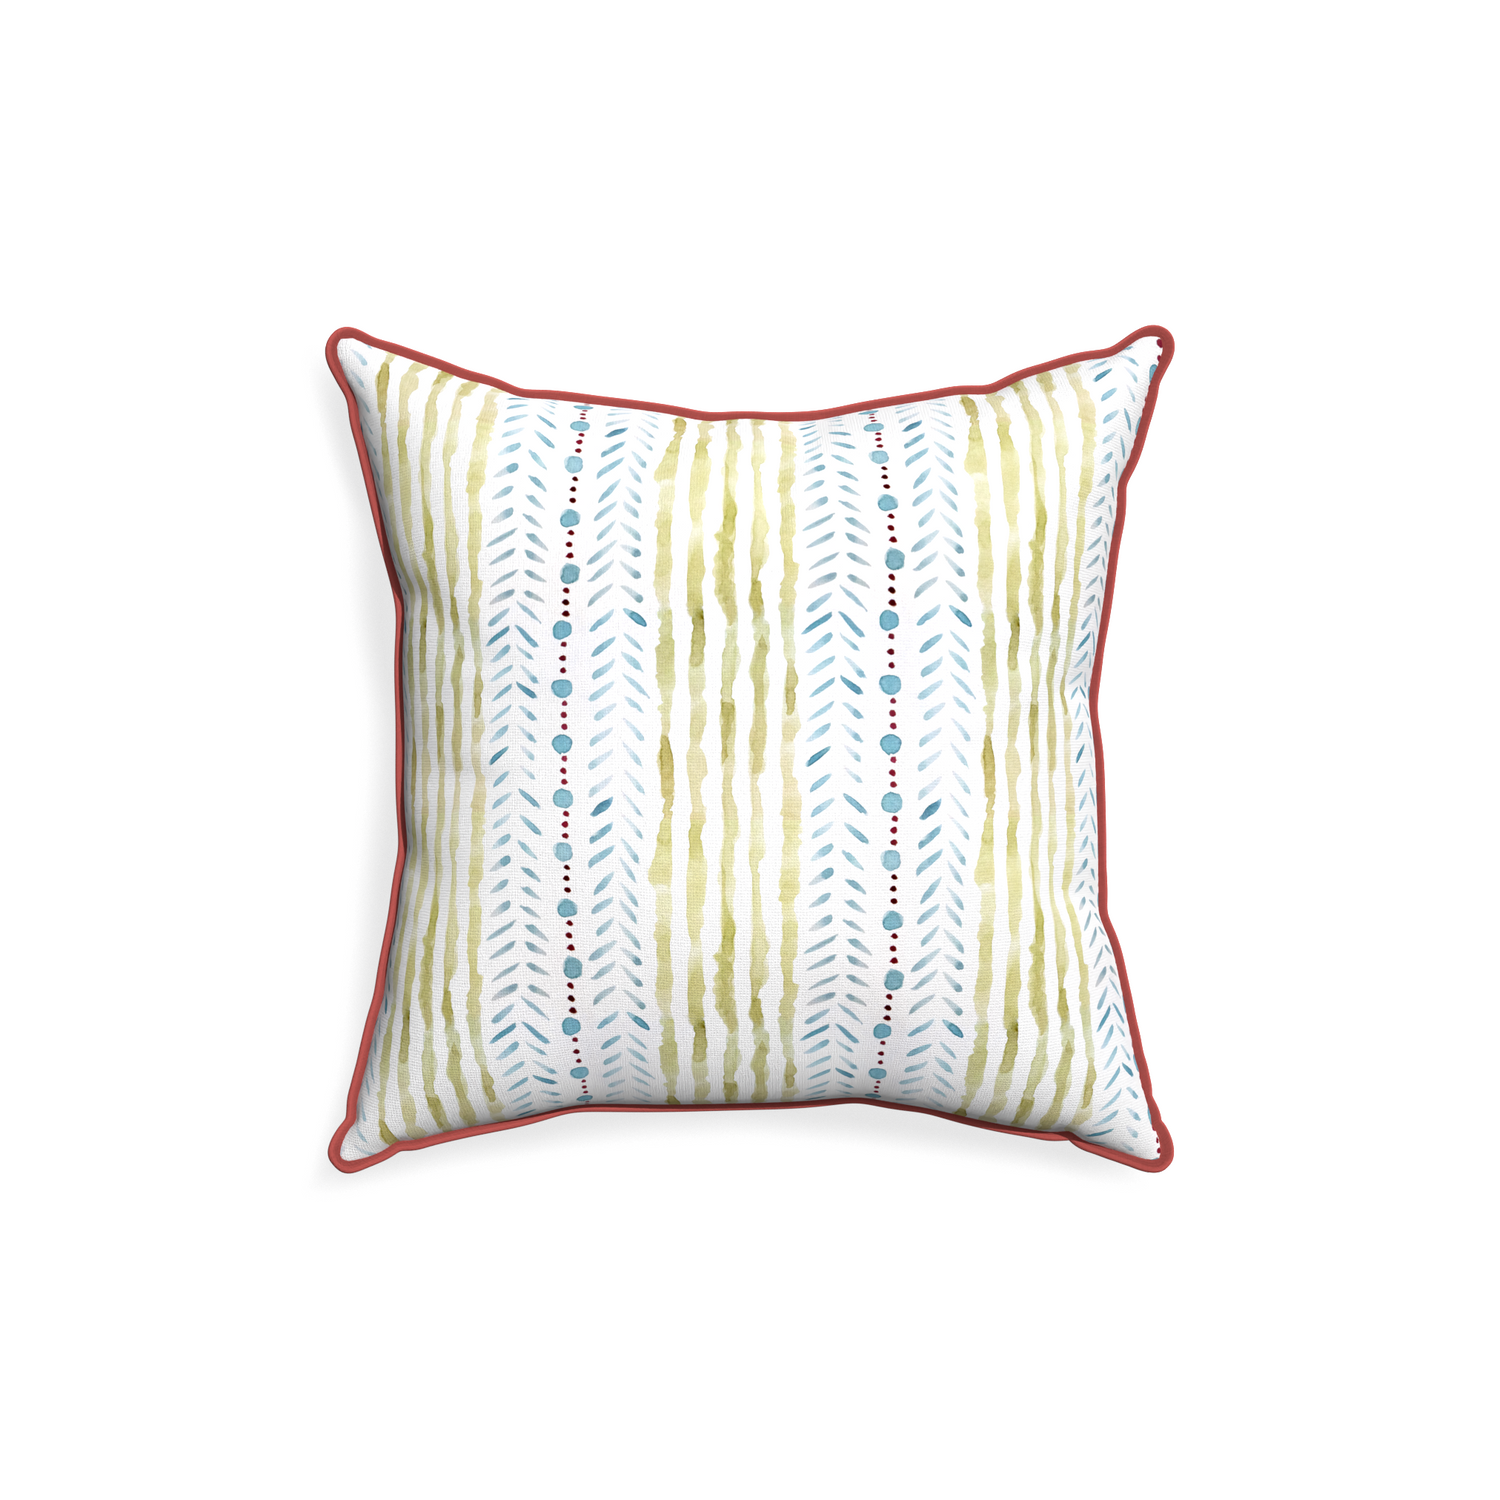 18-square julia custom pillow with c piping on white background